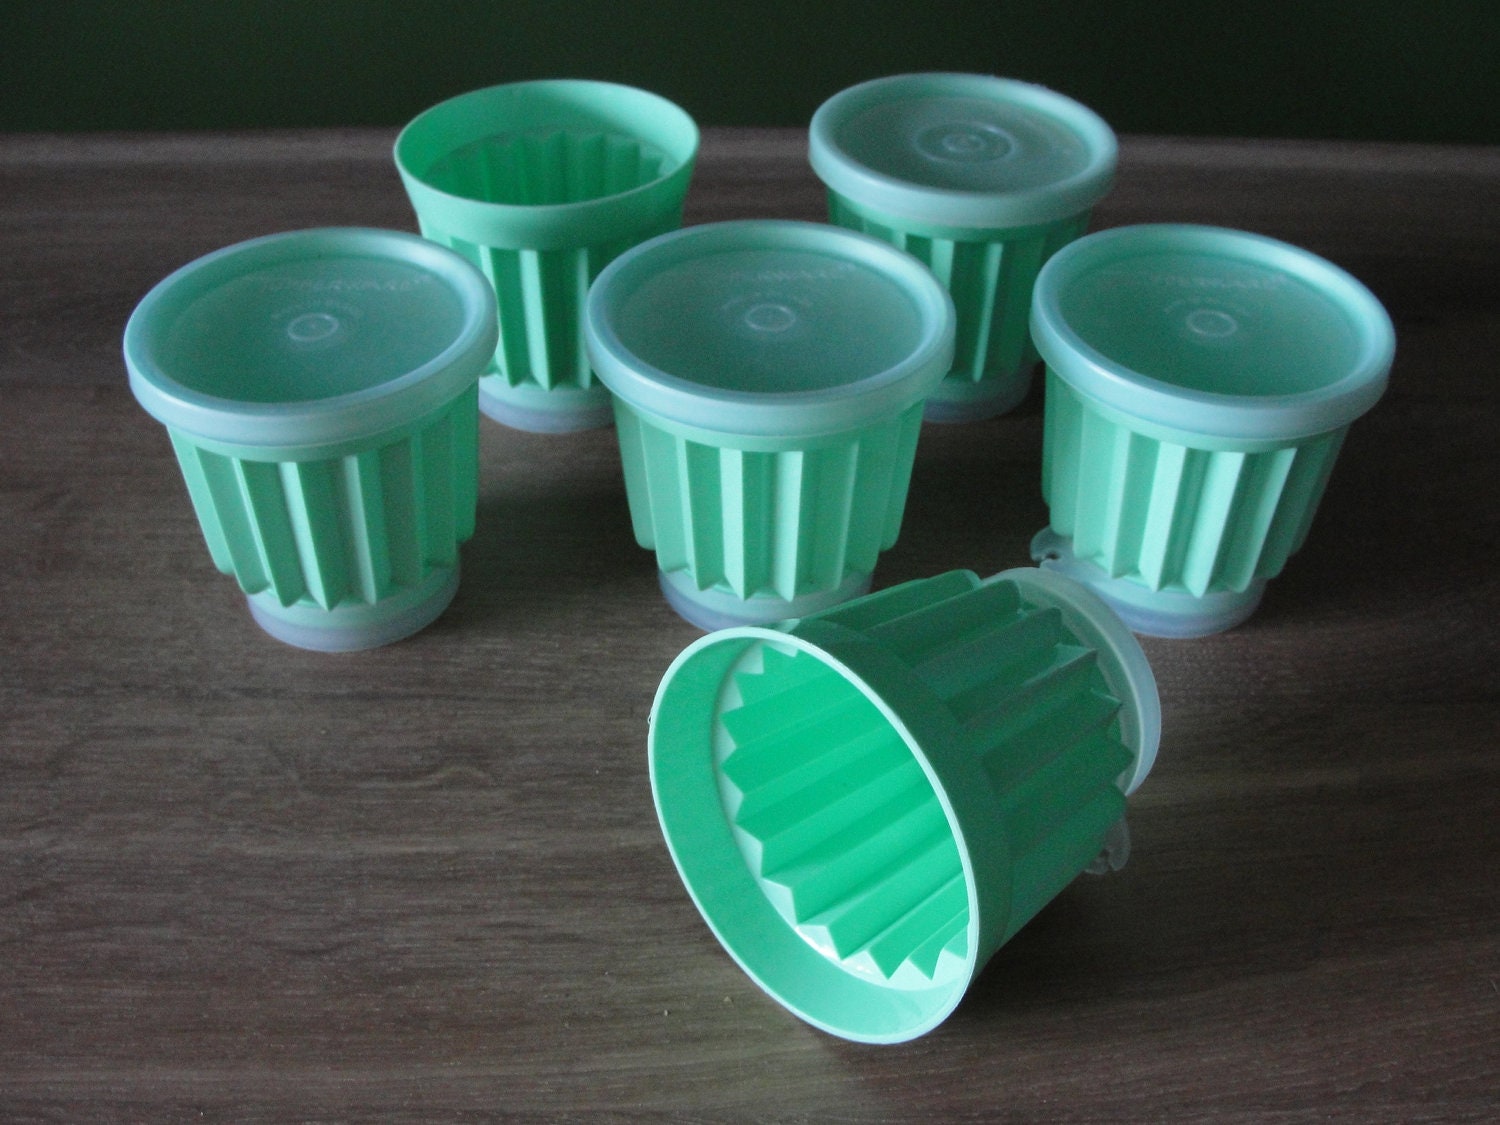 6 Mint Green Mini Jello Molds from Tupperware with lids